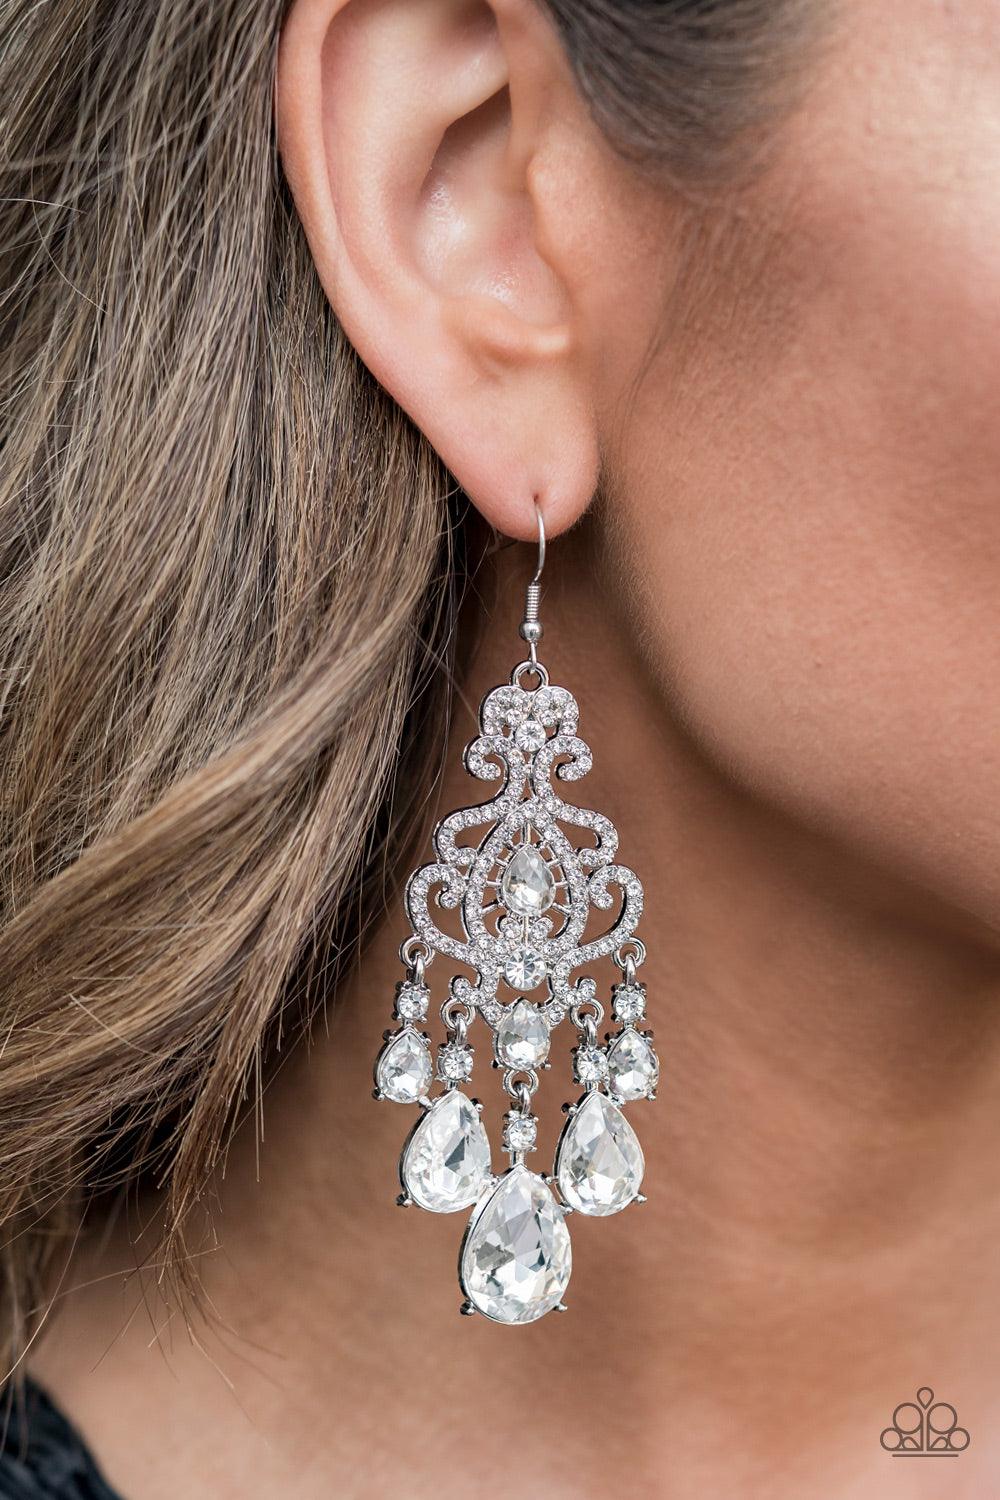 Paparazzi Accessories Queen Of All Things Sparkly - White Gradually increasing in size, glassy white teardrop gems create a dramatic fringe at the bottom of a decorative silver frame swirling with dainty white rhinestones for a timelessly over-the-top spa